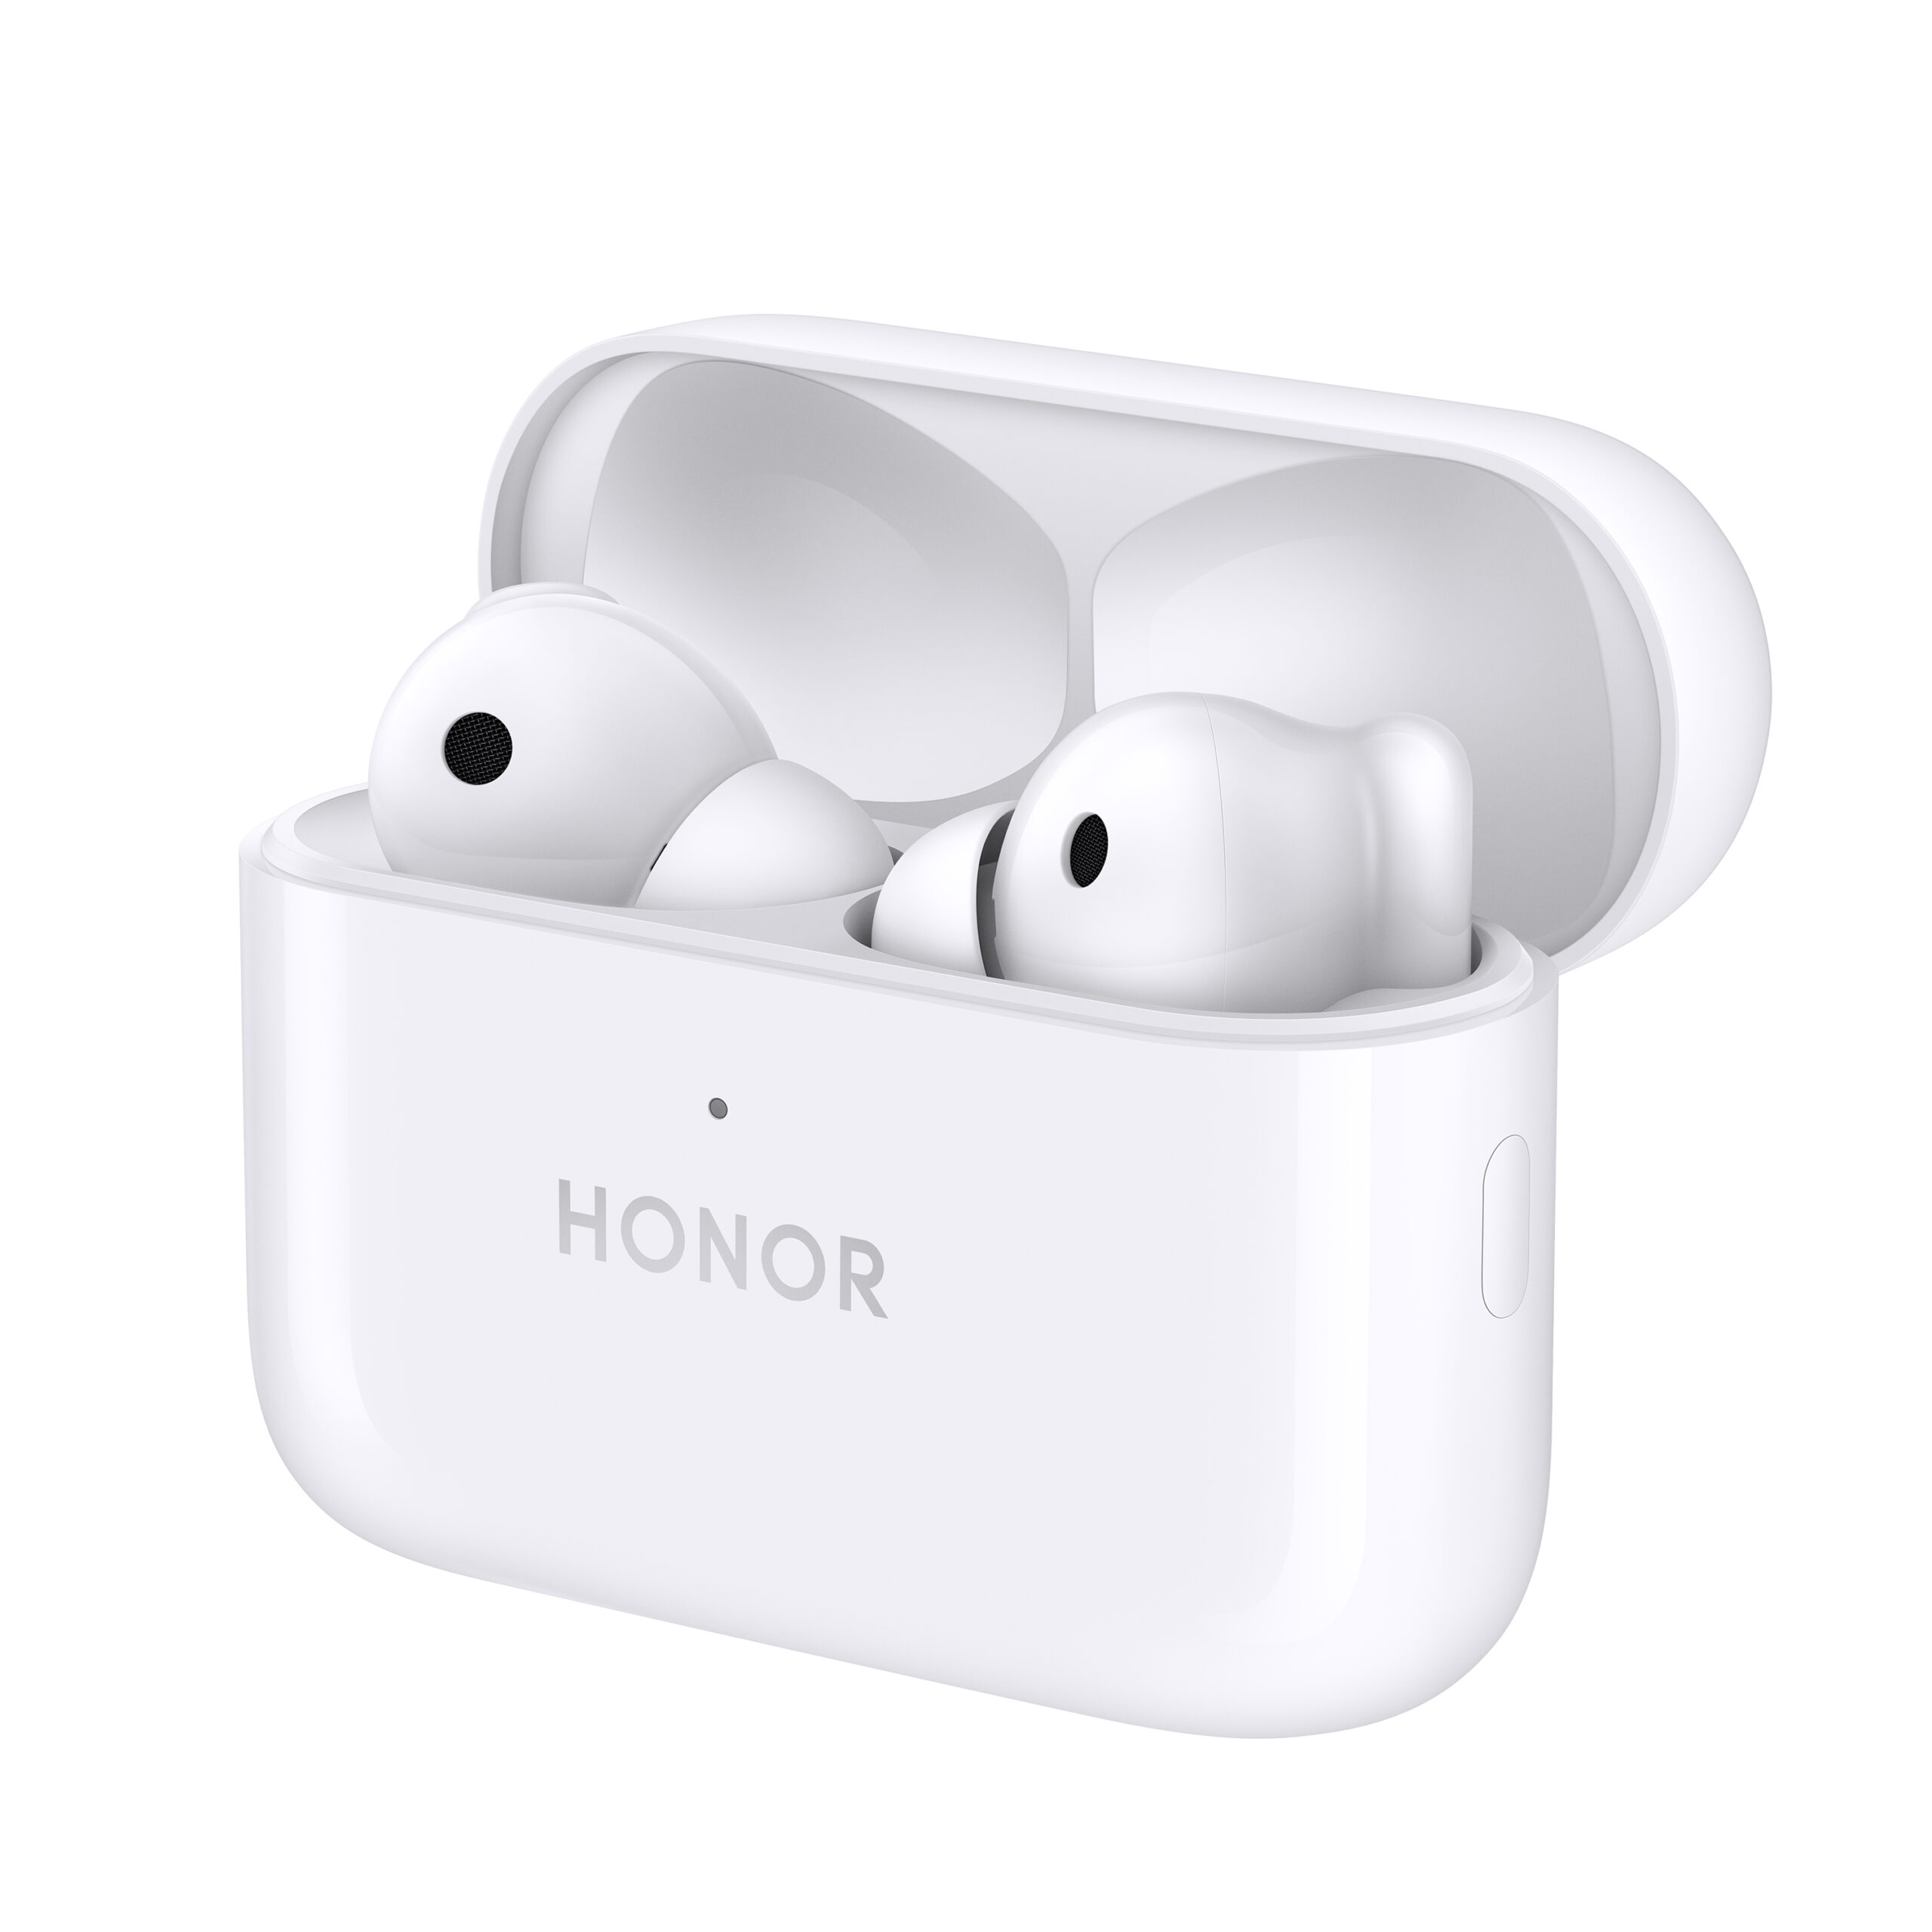 HONOR Earbuds 2 Lite Visual 1 1 scaled